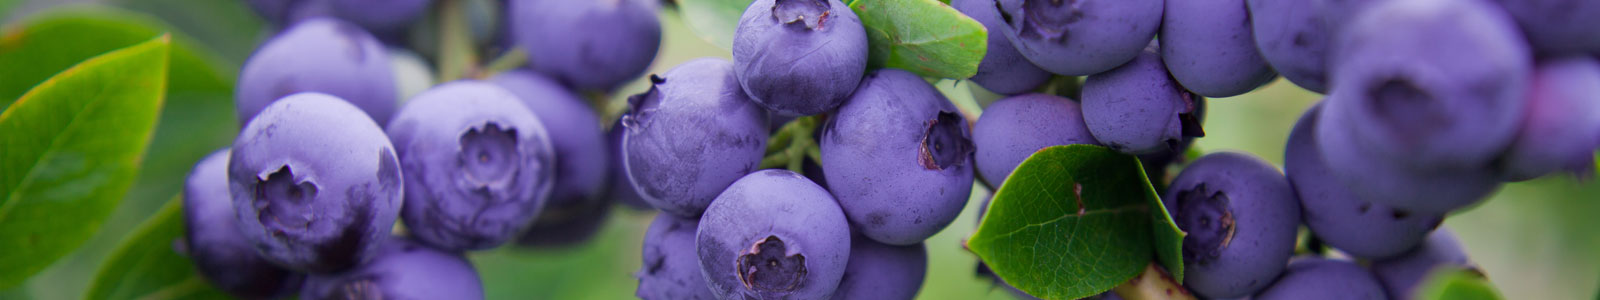 Blueberries page banner